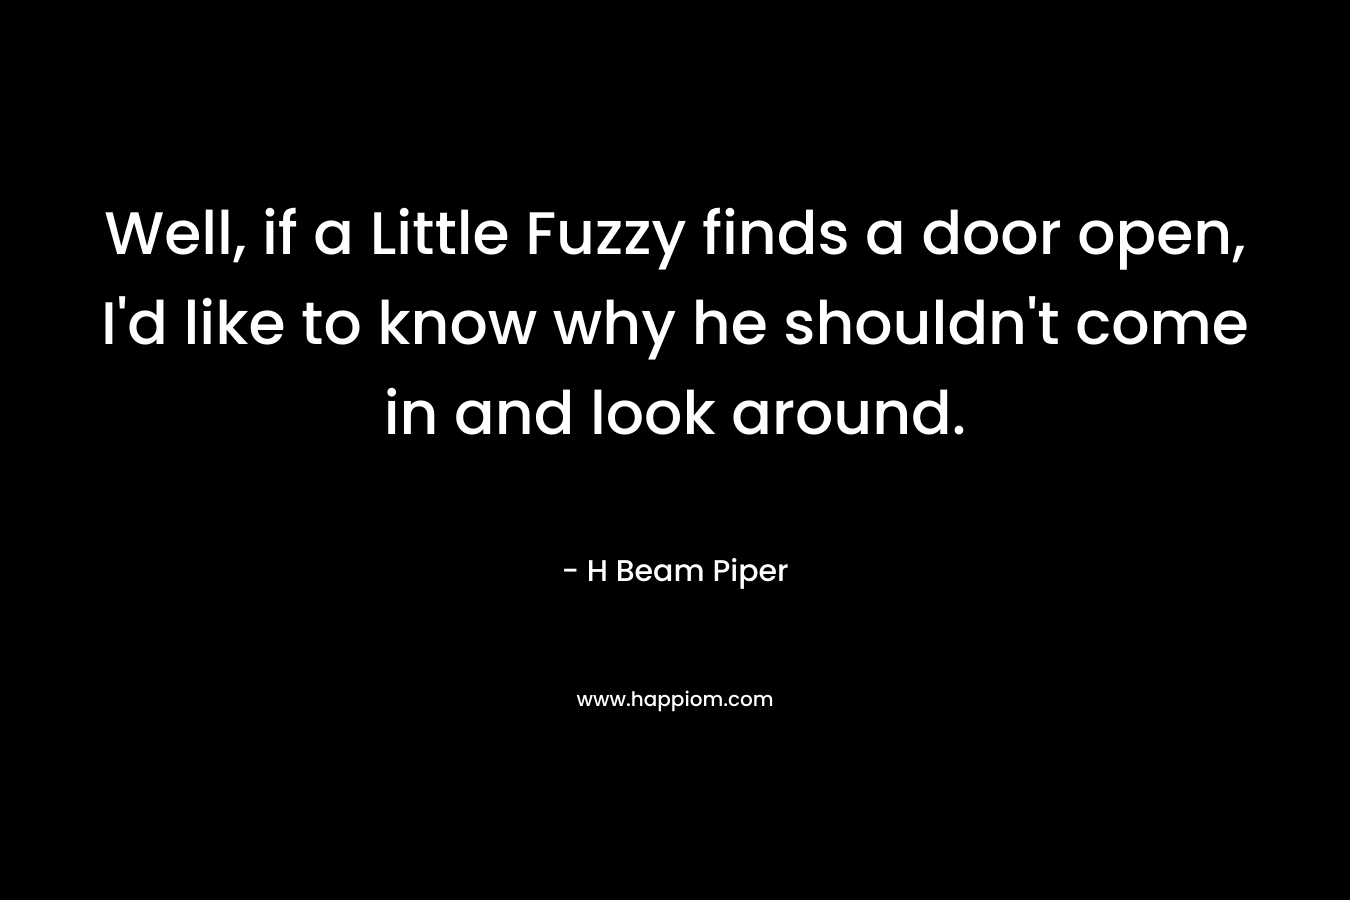 Well, if a Little Fuzzy finds a door open, I’d like to know why he shouldn’t come in and look around. – H Beam Piper